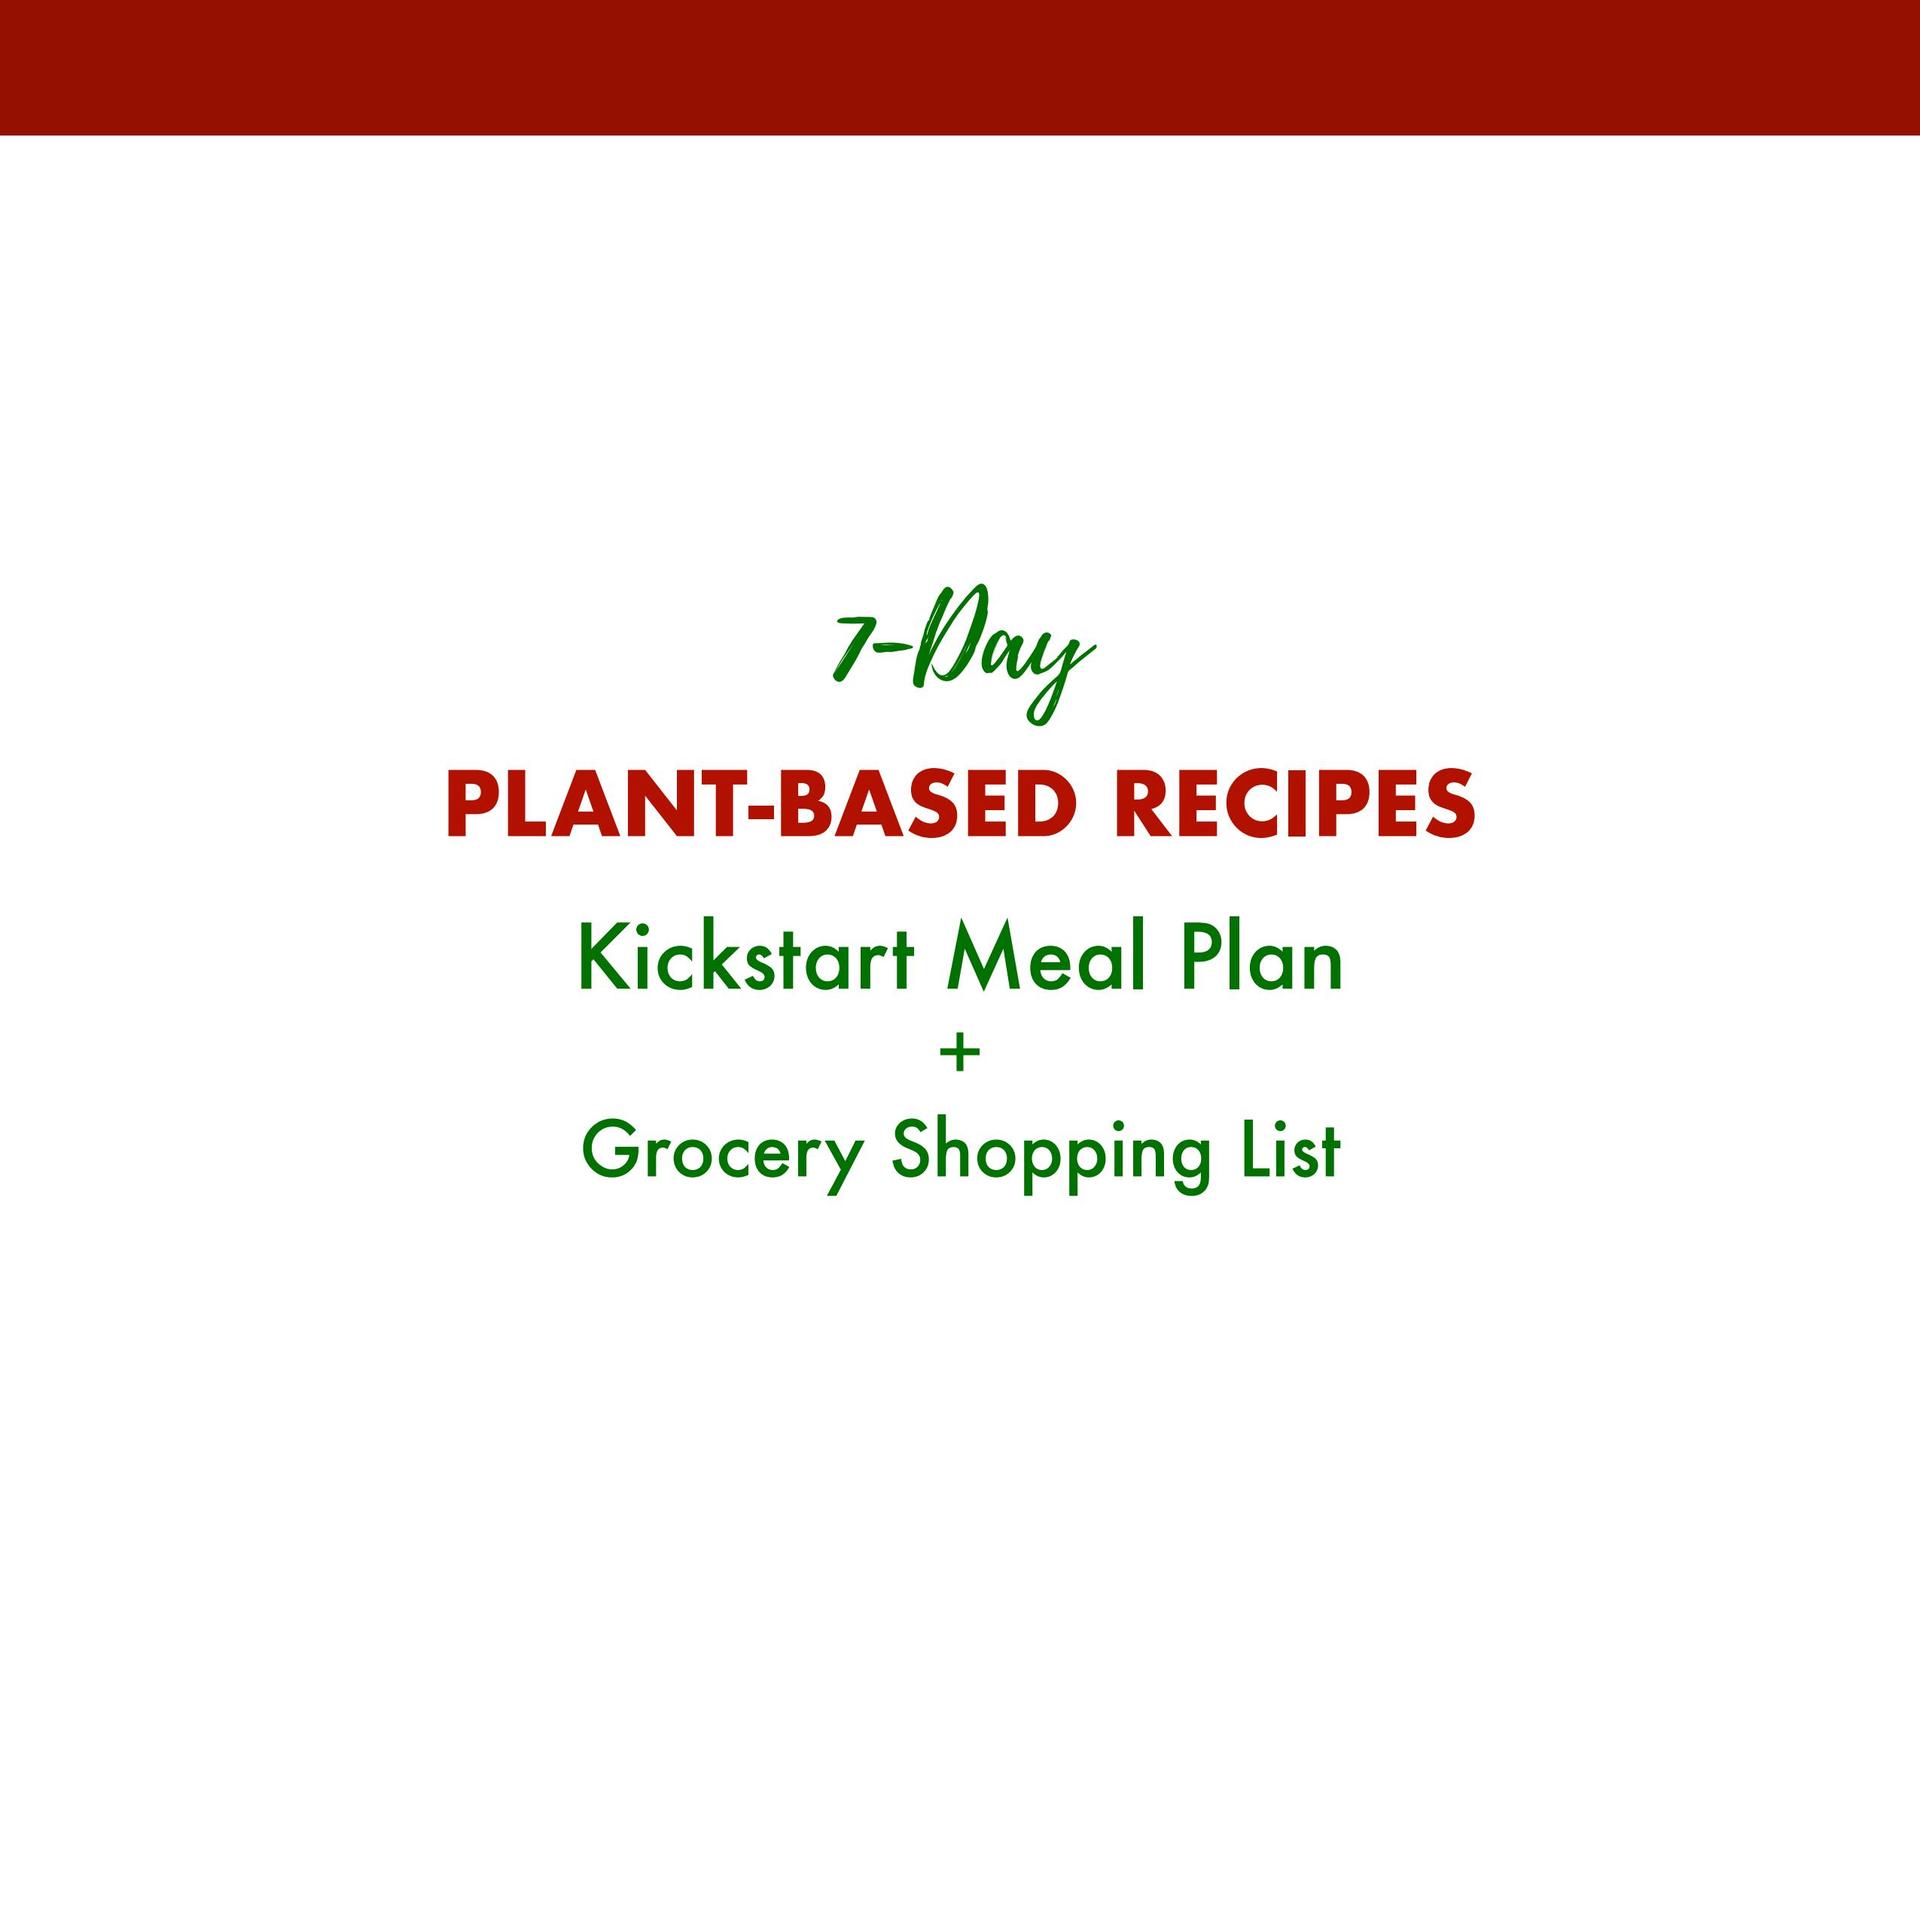 Delicious Nutritious Recipes I Love 30 Recipes 7-Day Plant-Based Kickstart Meal Plan Grocery Shopping List - photo 6